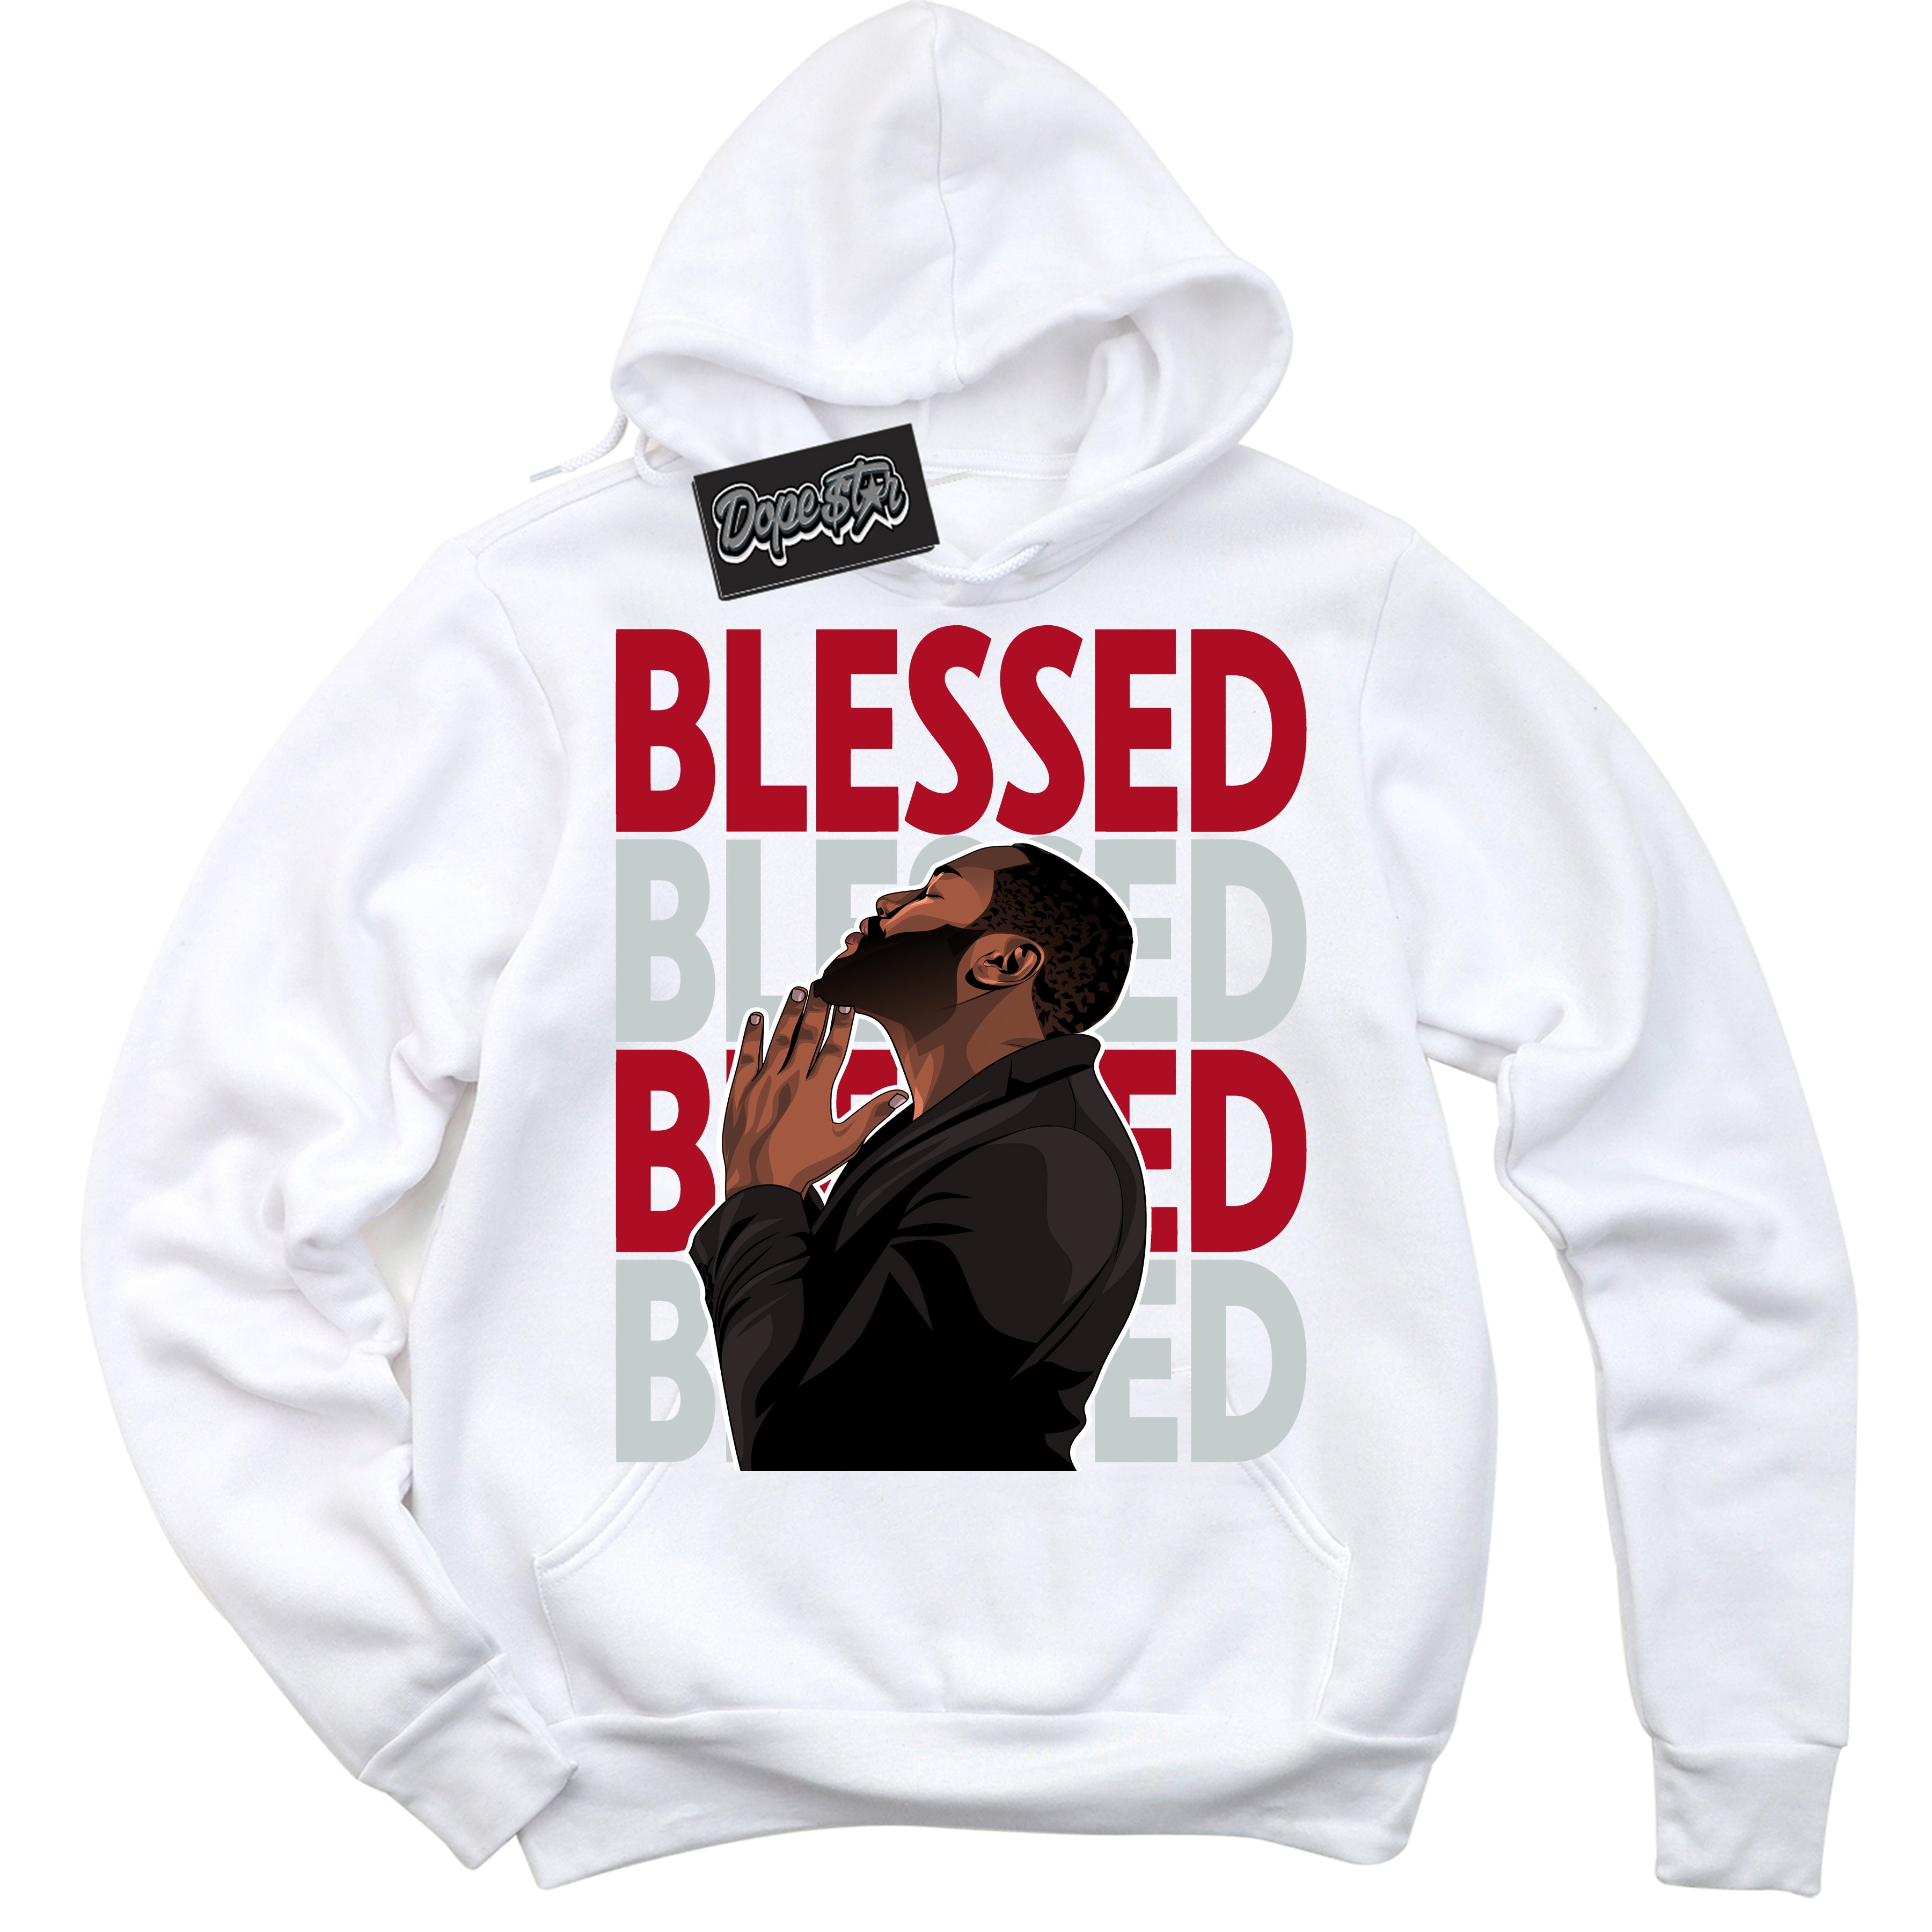 Cool White Hoodie with “ God Blessed ”  design that Perfectly Matches Reverse Ultraman Sneakers.